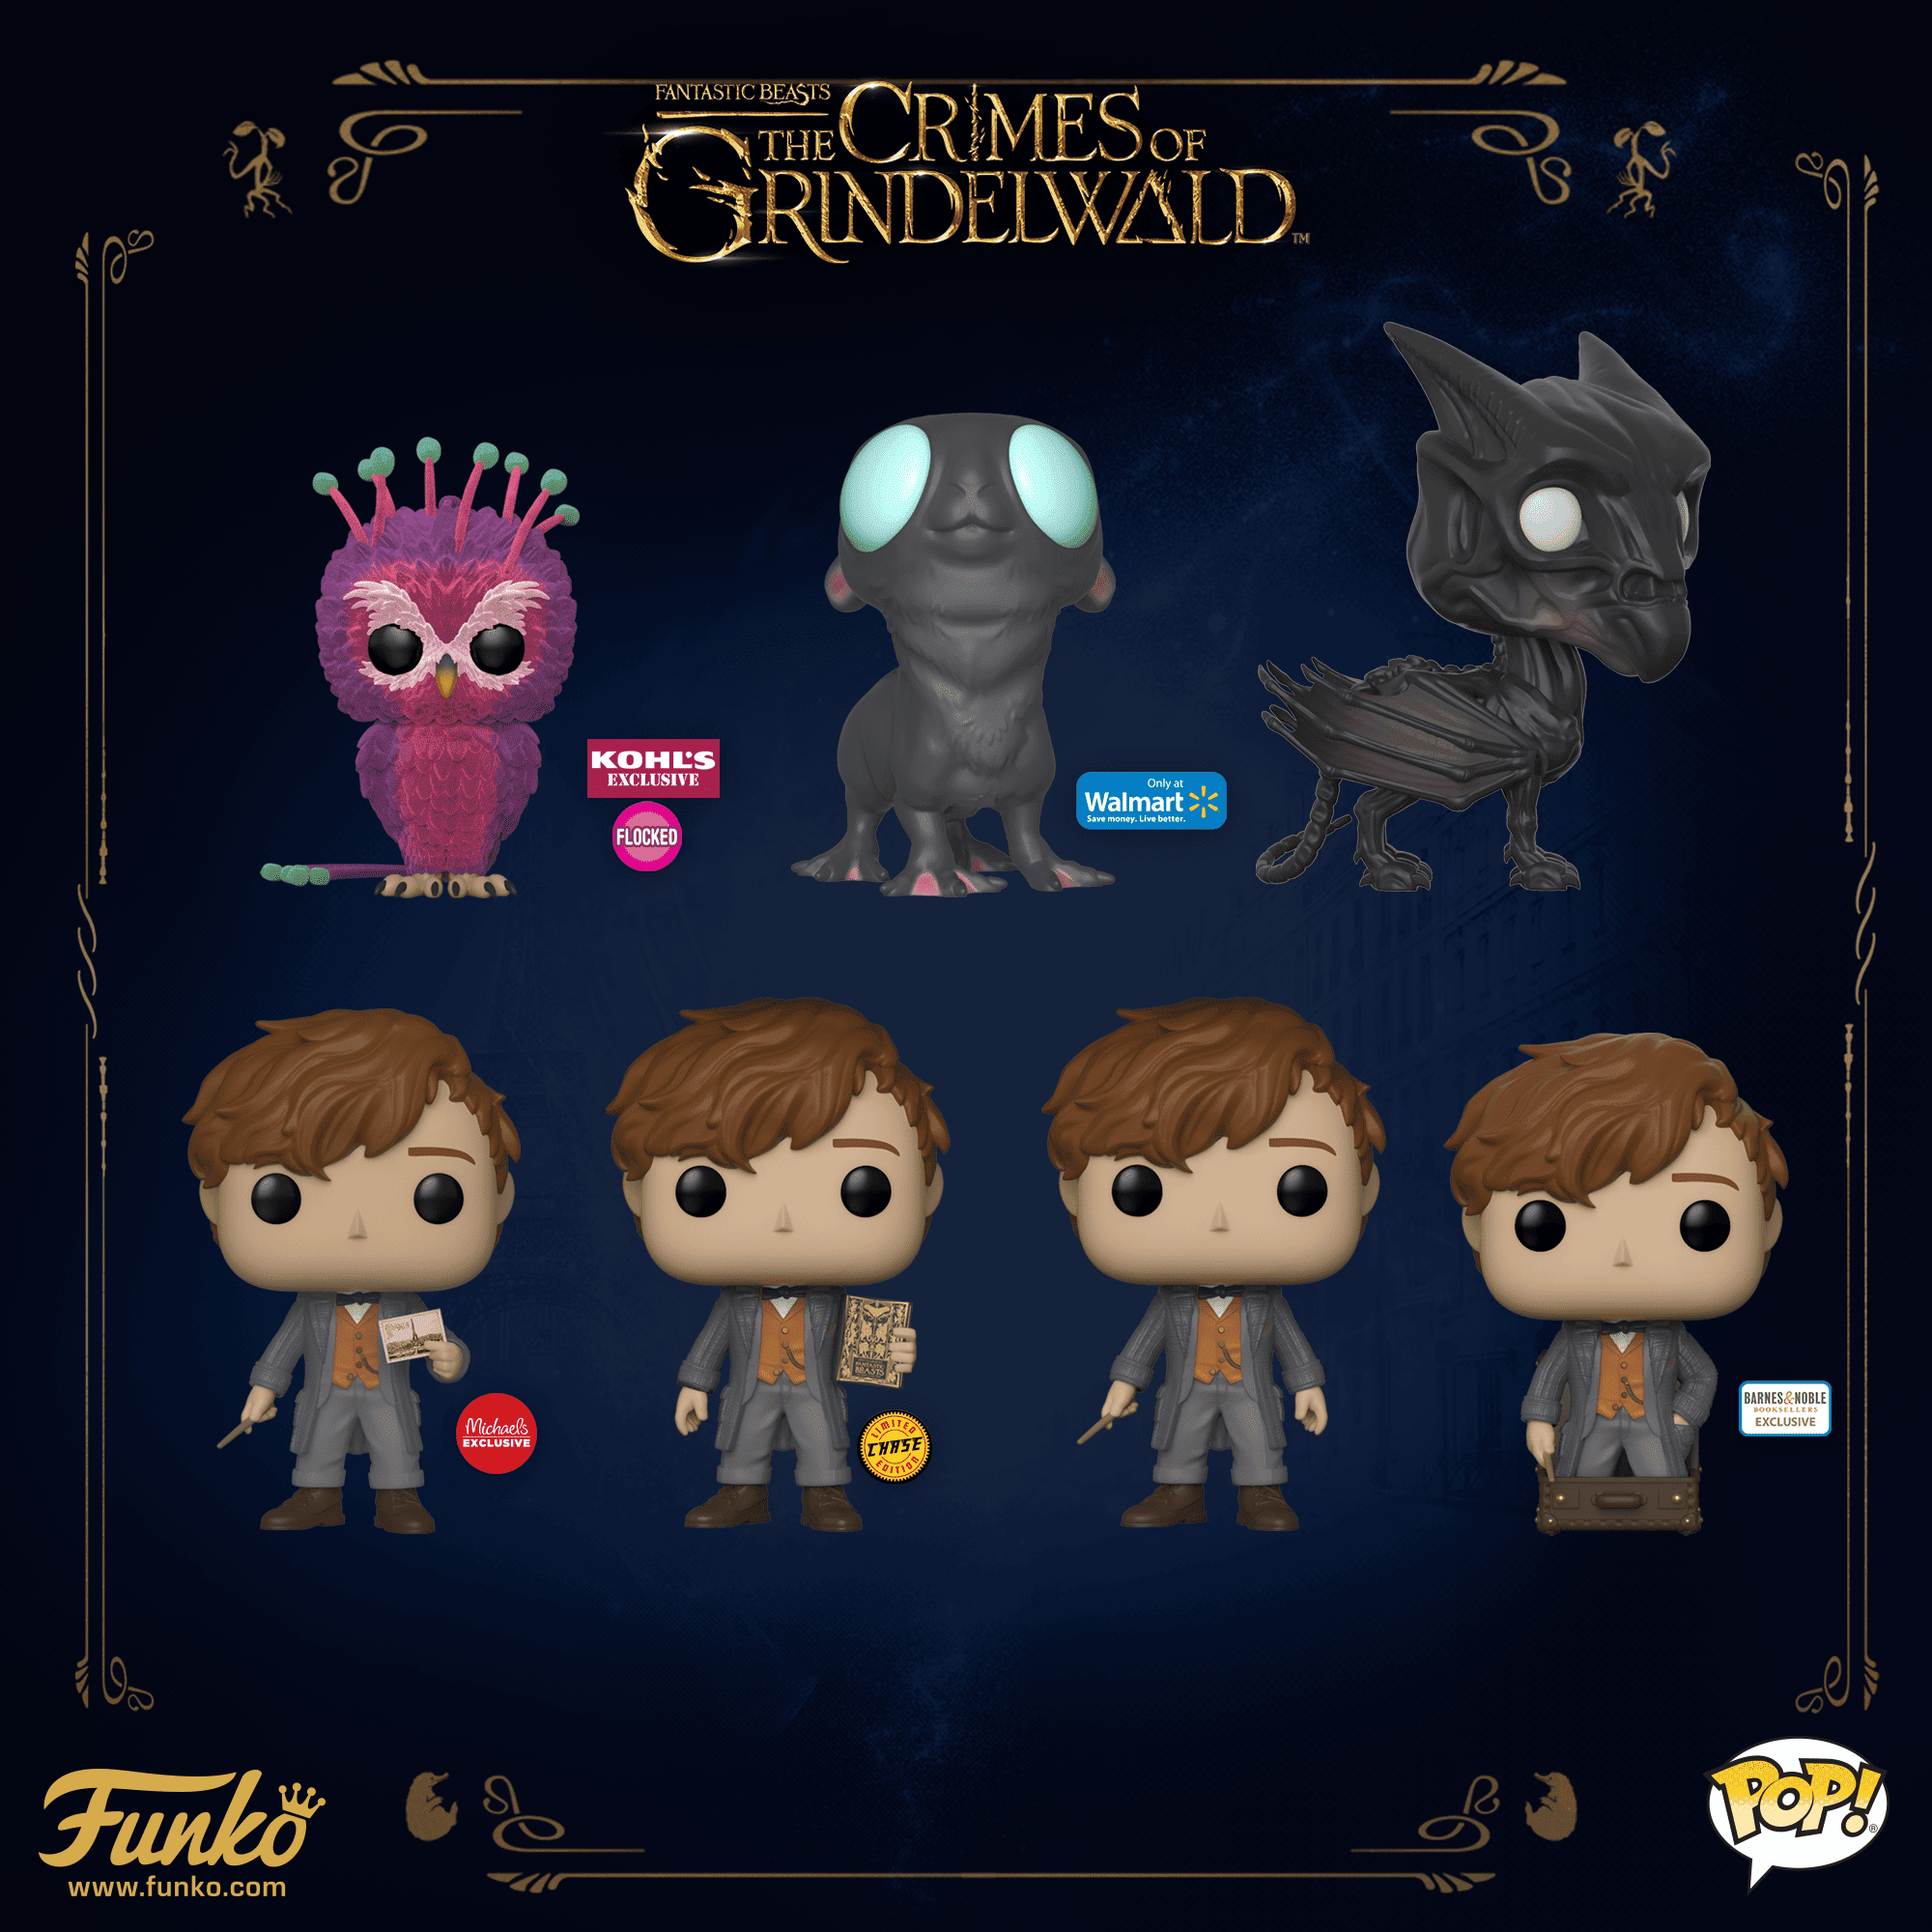 Coming Soon: Fantastic Beasts: The of Grindelwald!